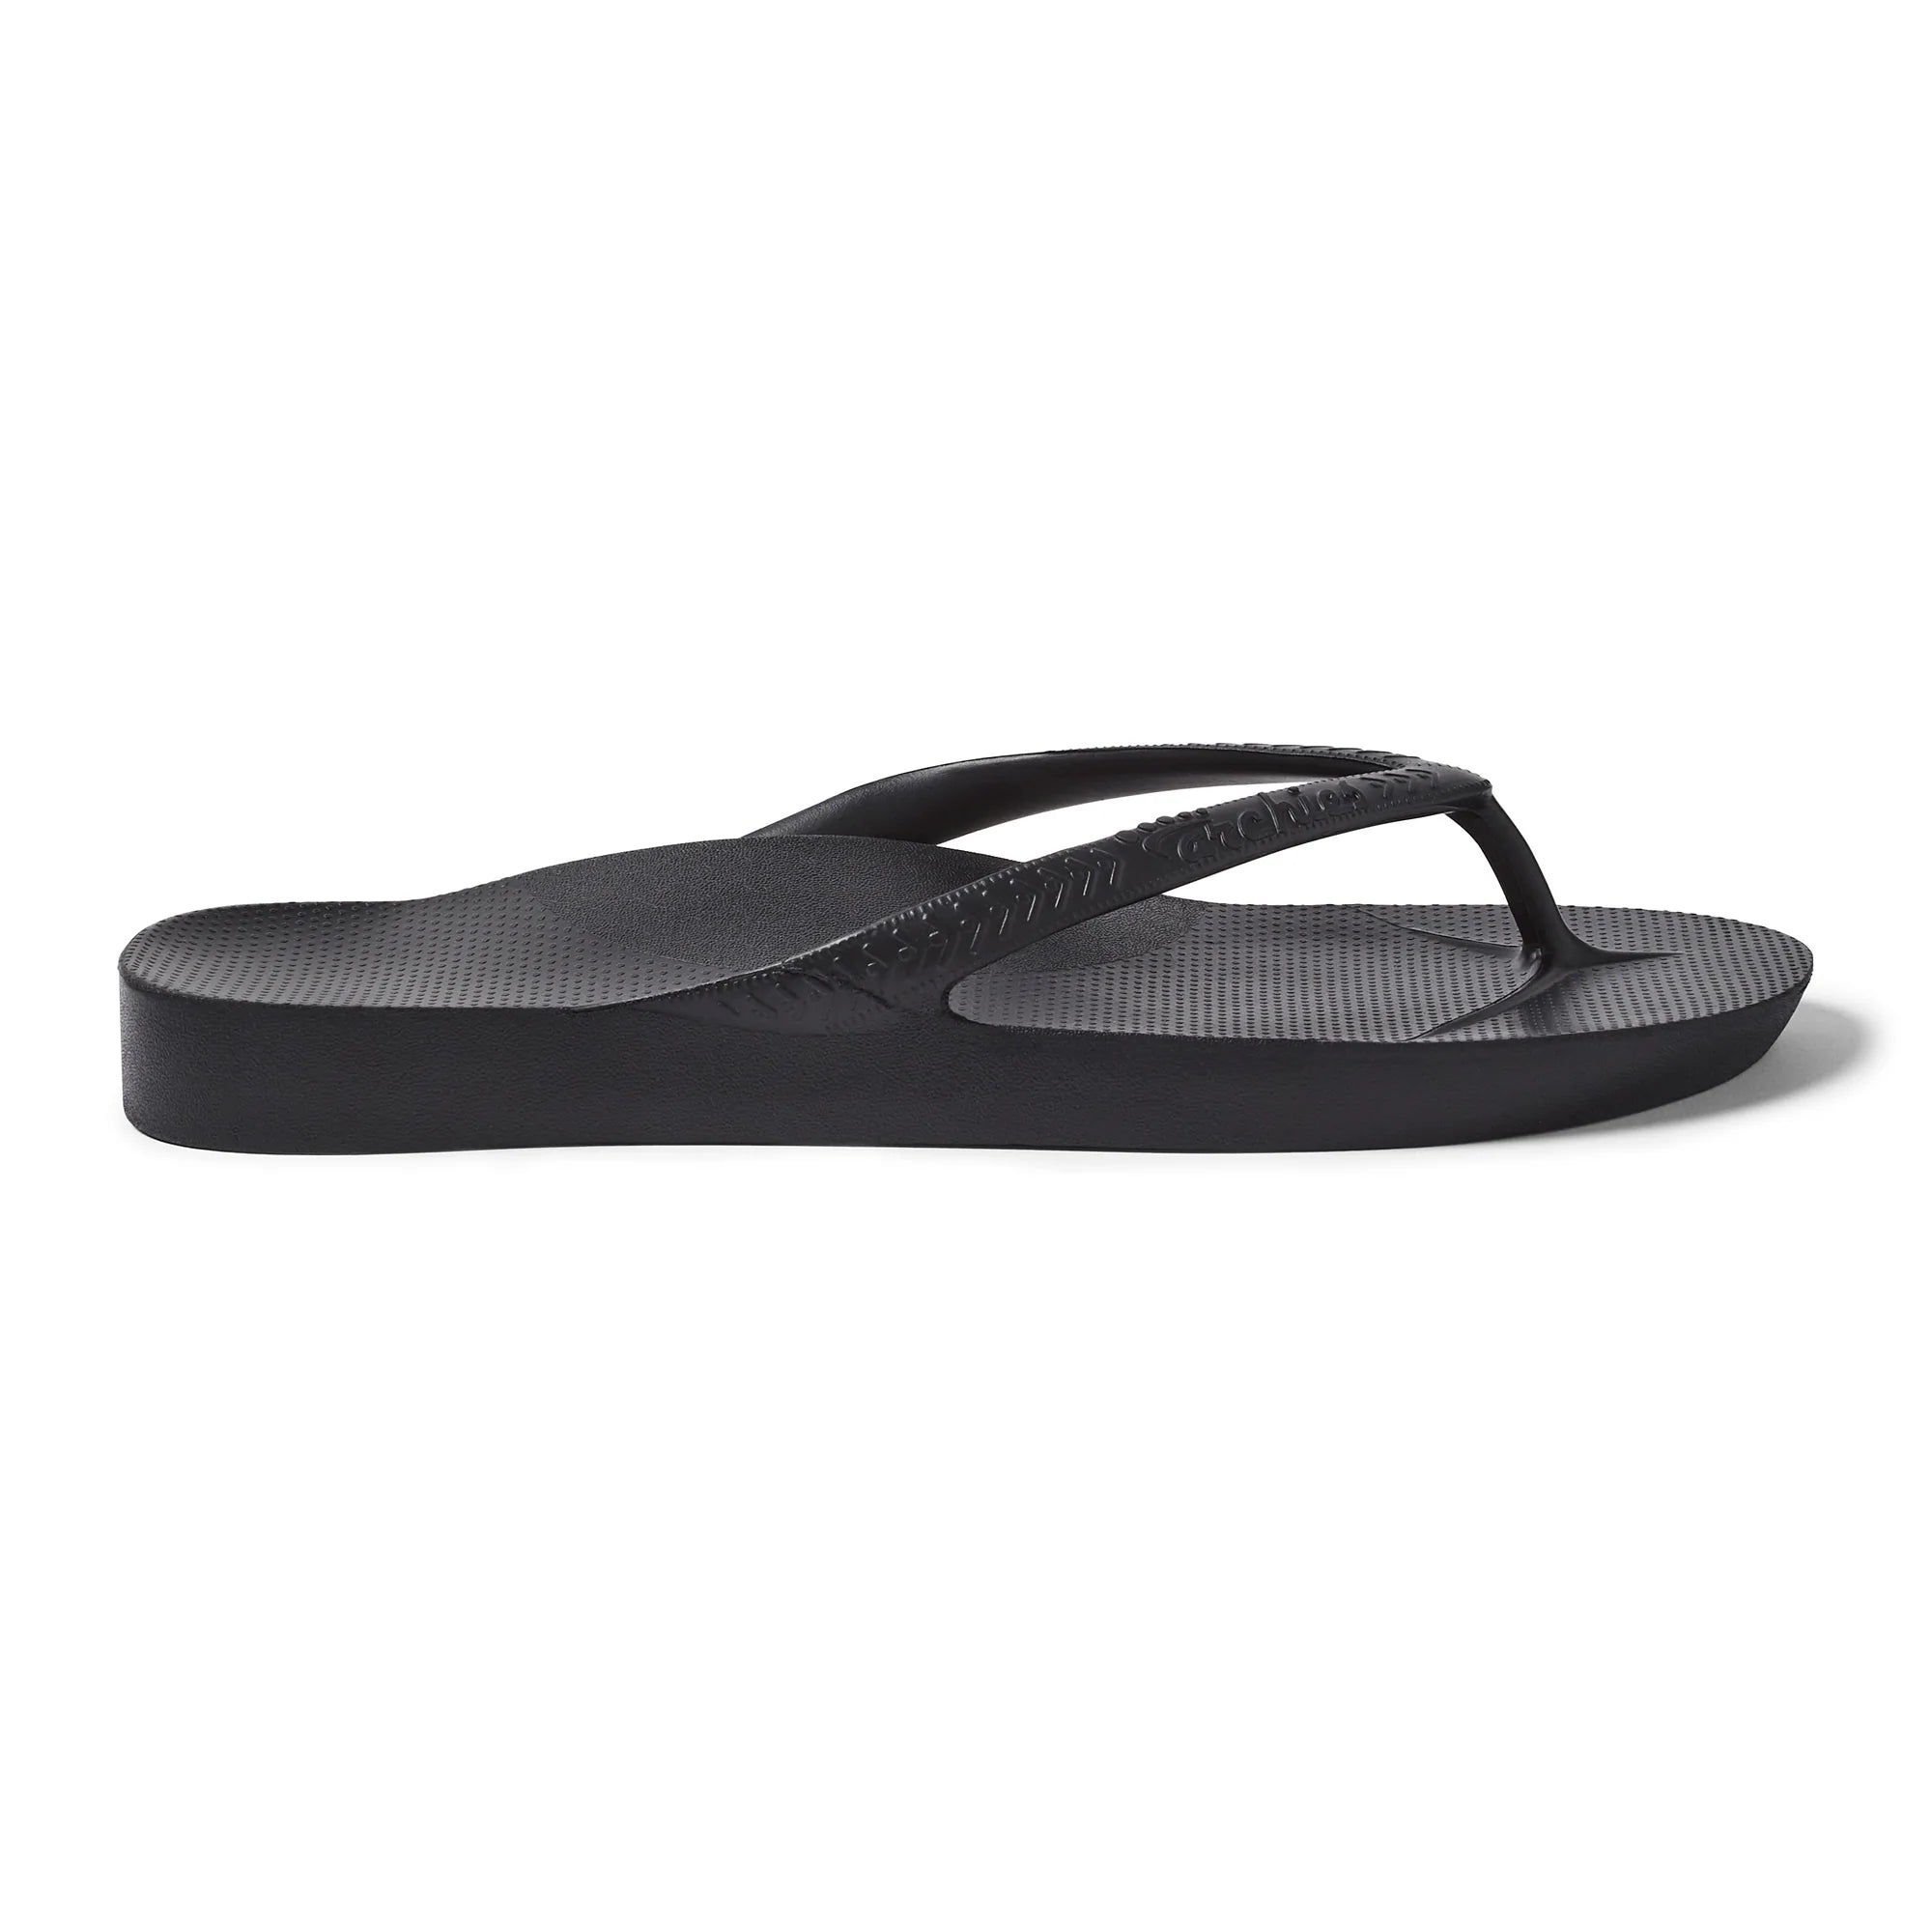 Archie’s Black - Arch Support Jandals